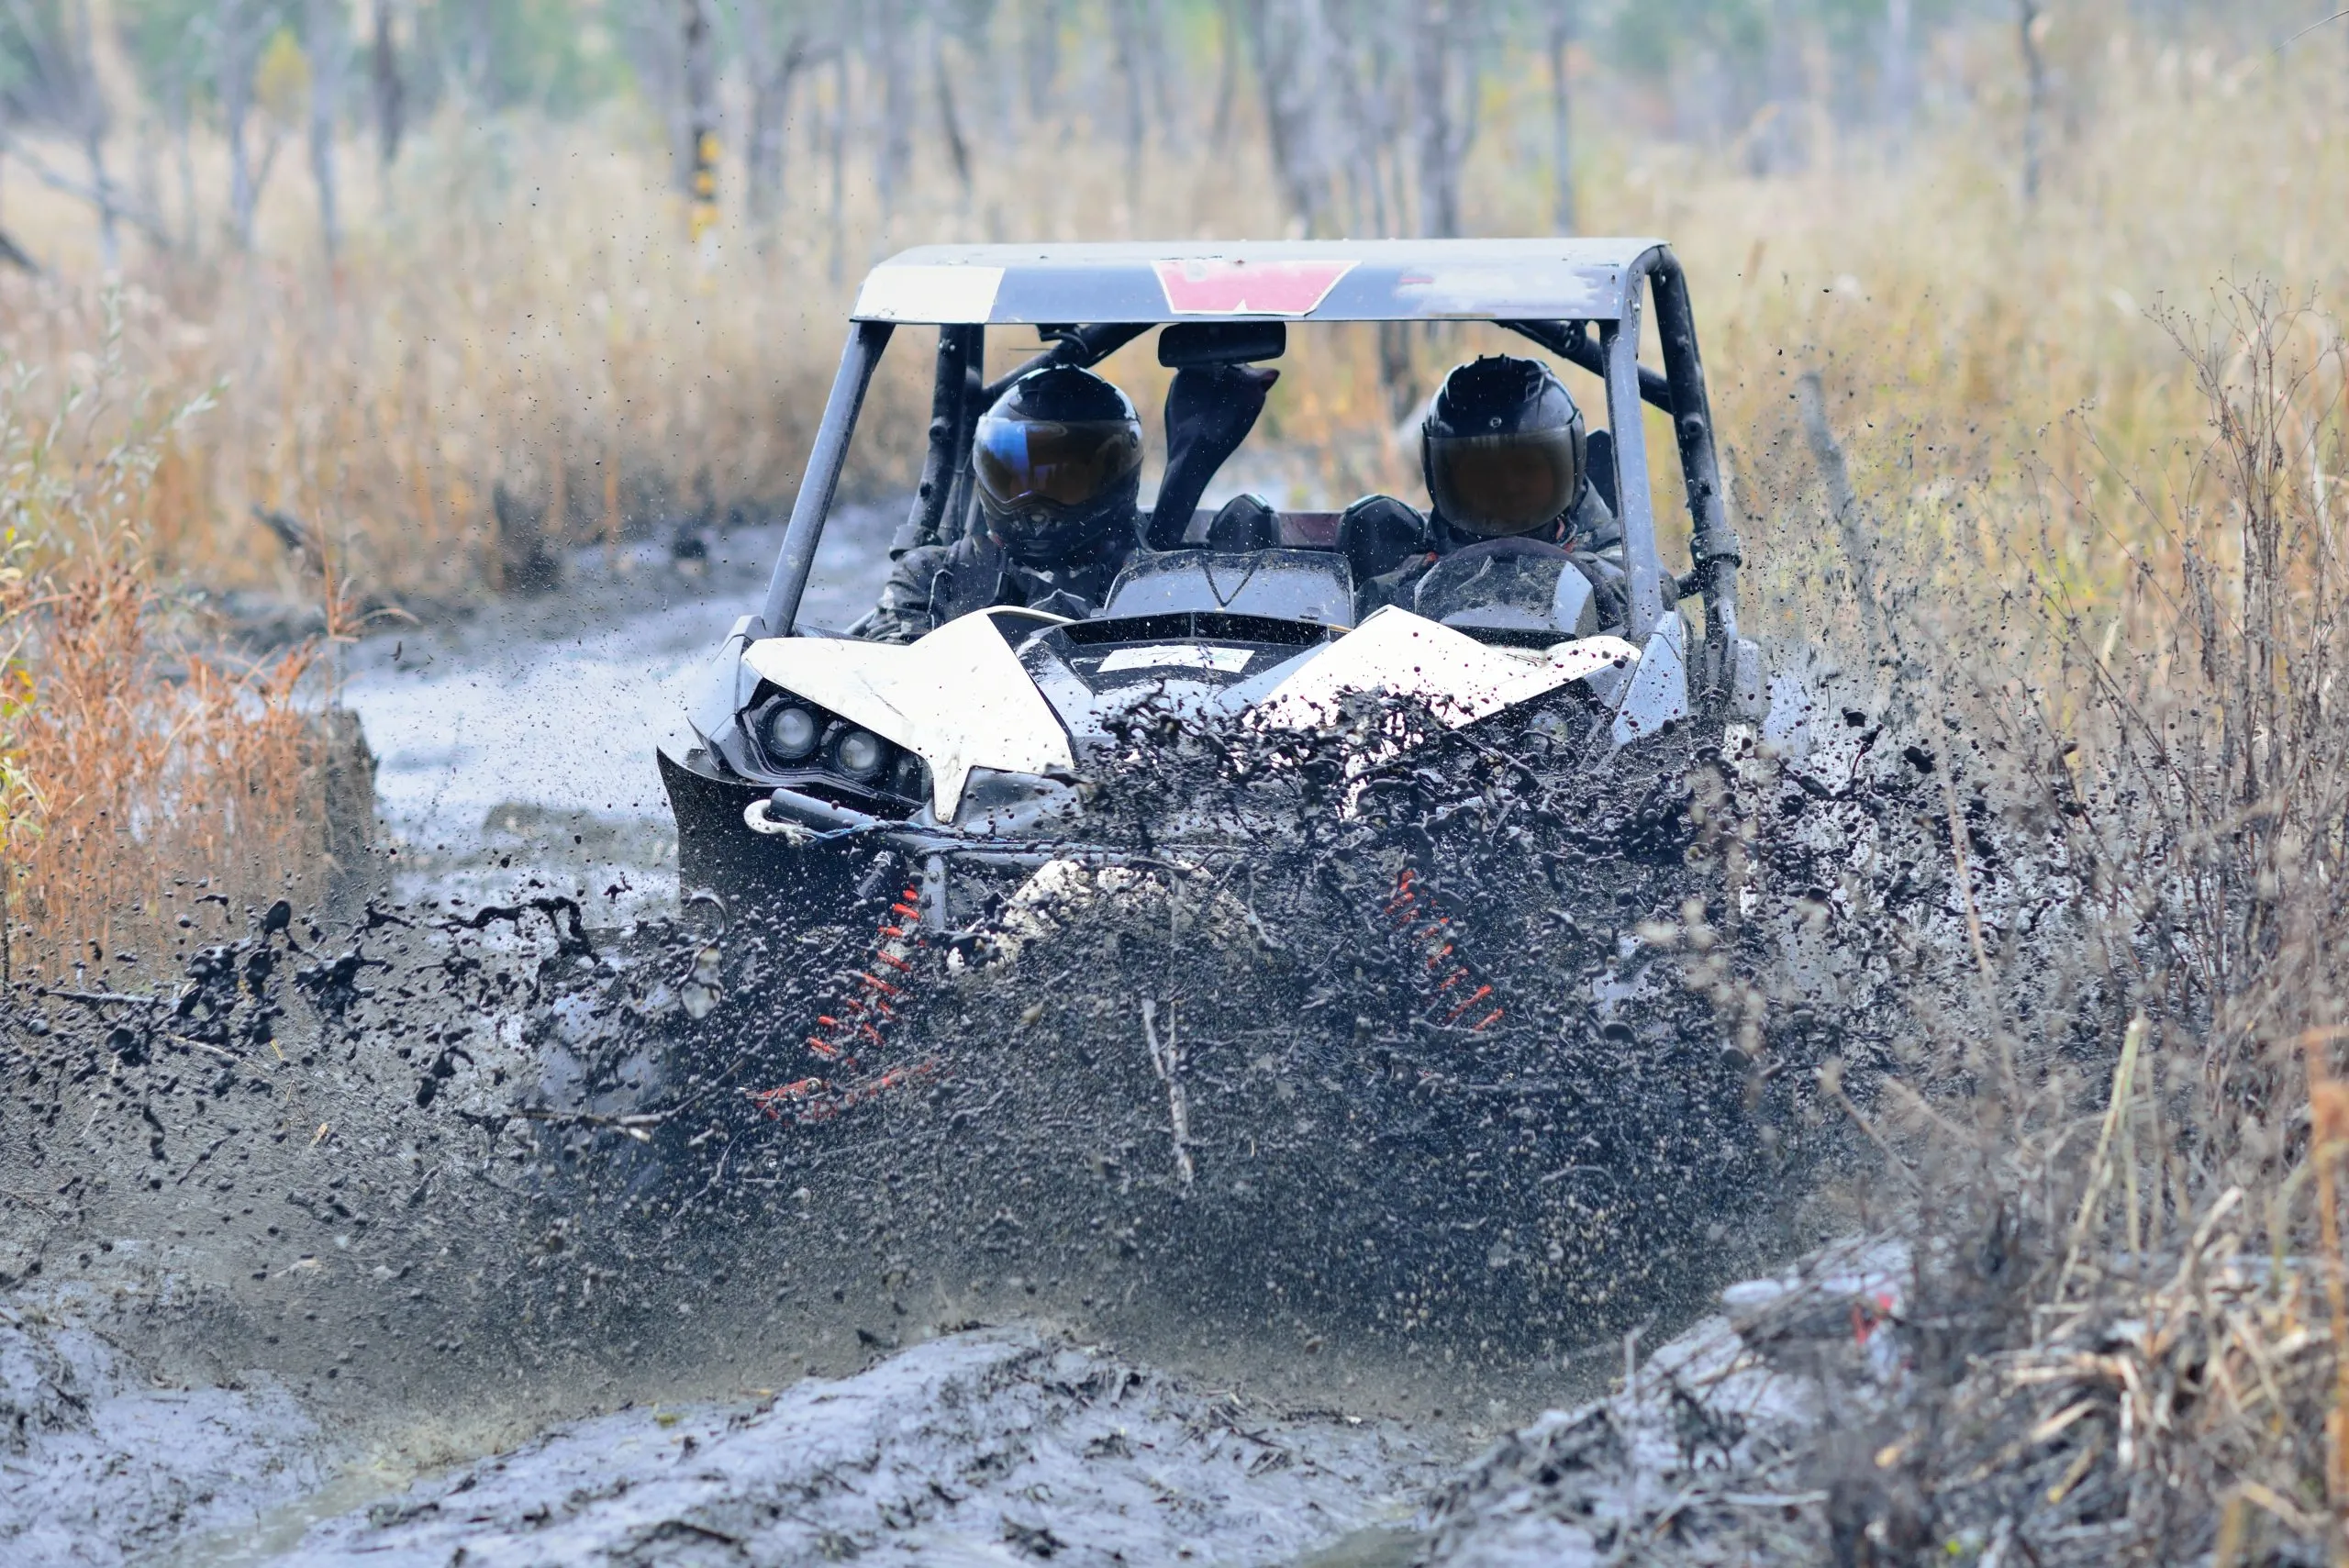 Amazing UTV driving in mud and water at Autumn day